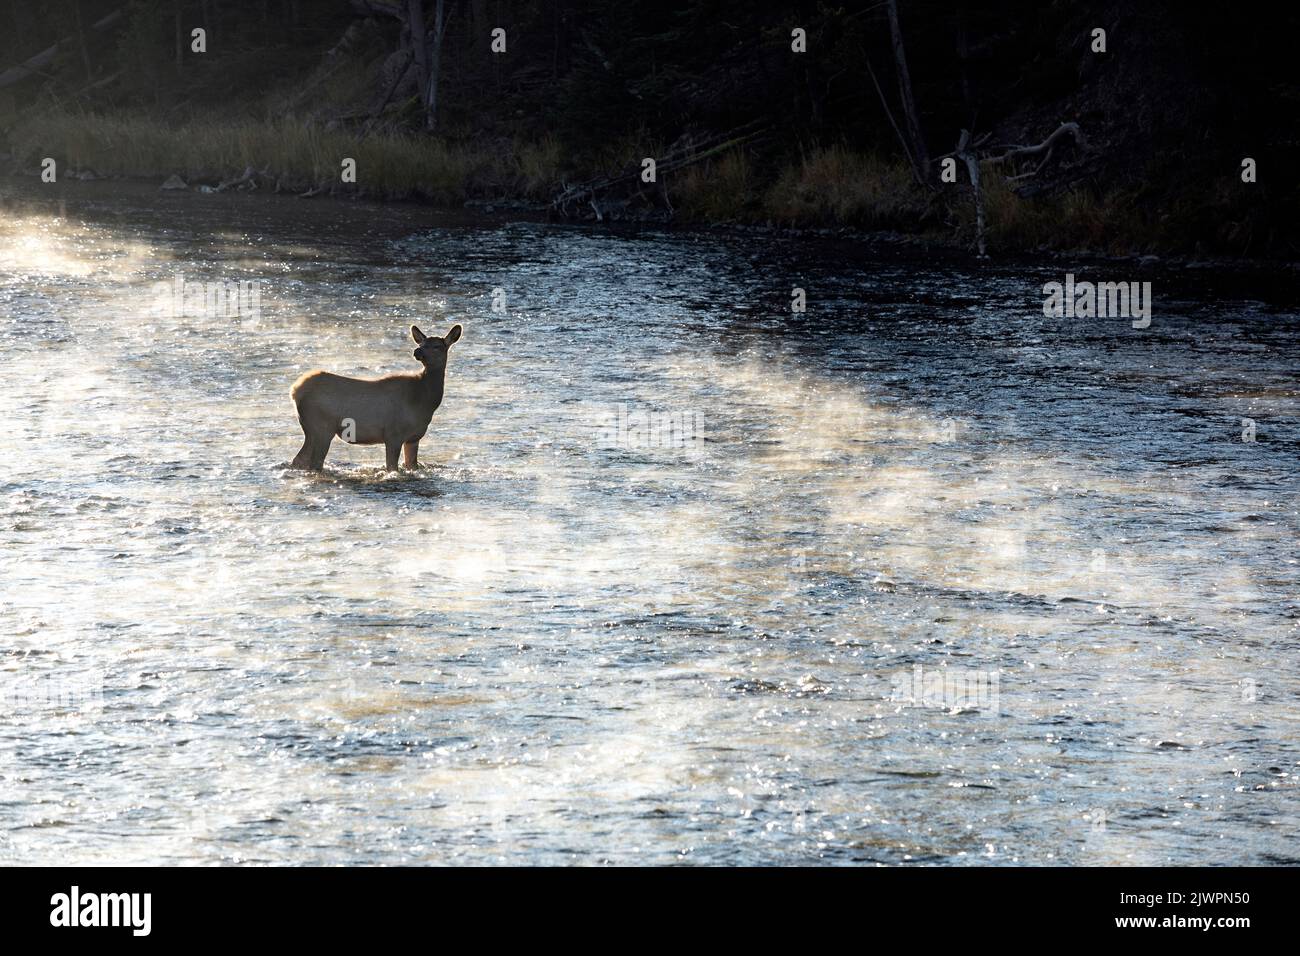 WY05031-00....WYOMING - junger Elch im Madison River, Yellowstone National Park. Stockfoto